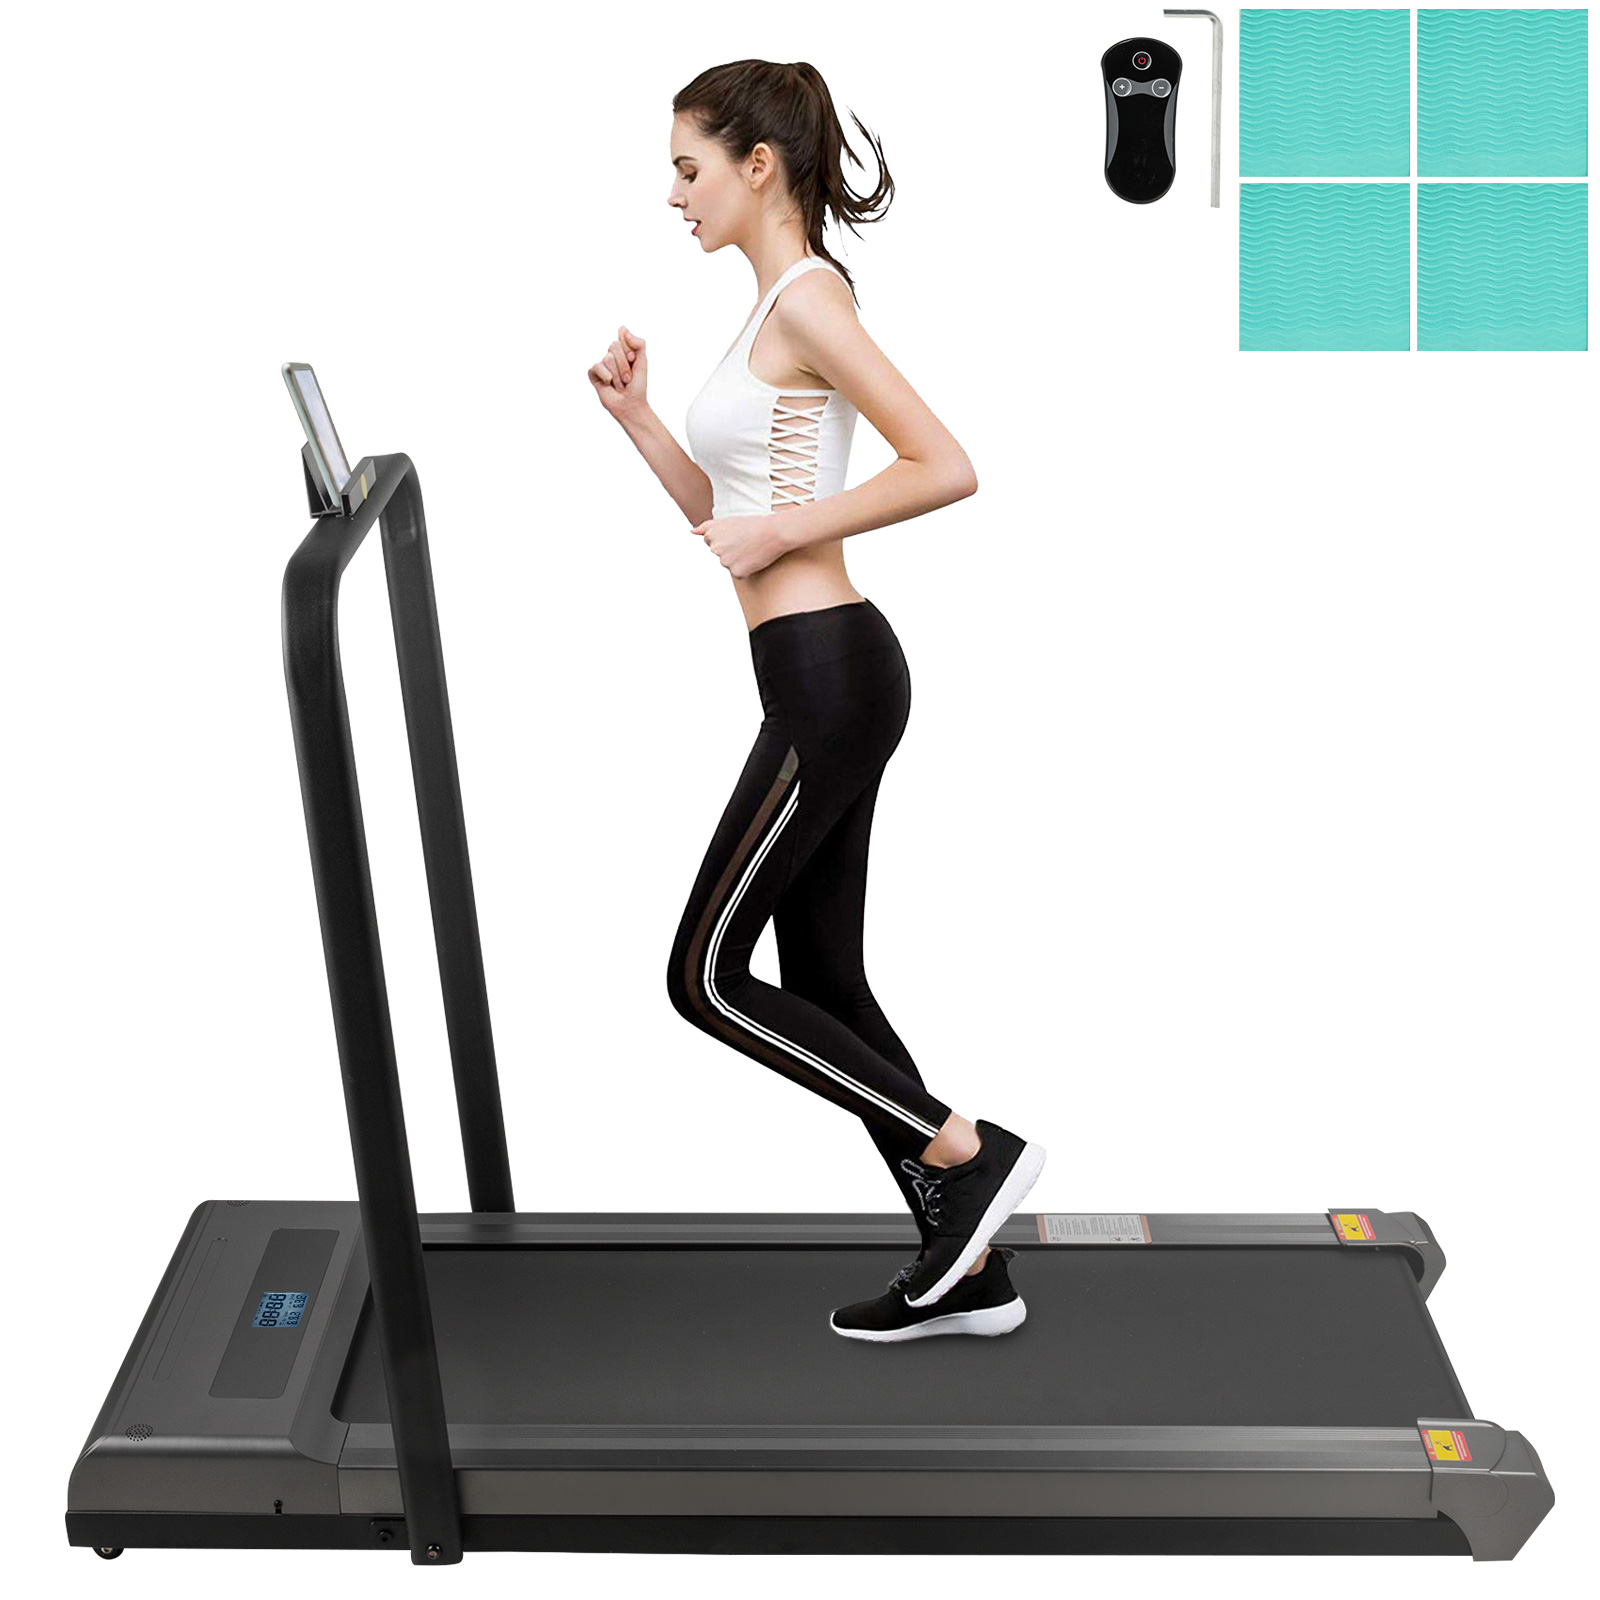 Details about   NEW Under Desk Treadmill Walking Pad Exercise Machine Remote Control Home Office 